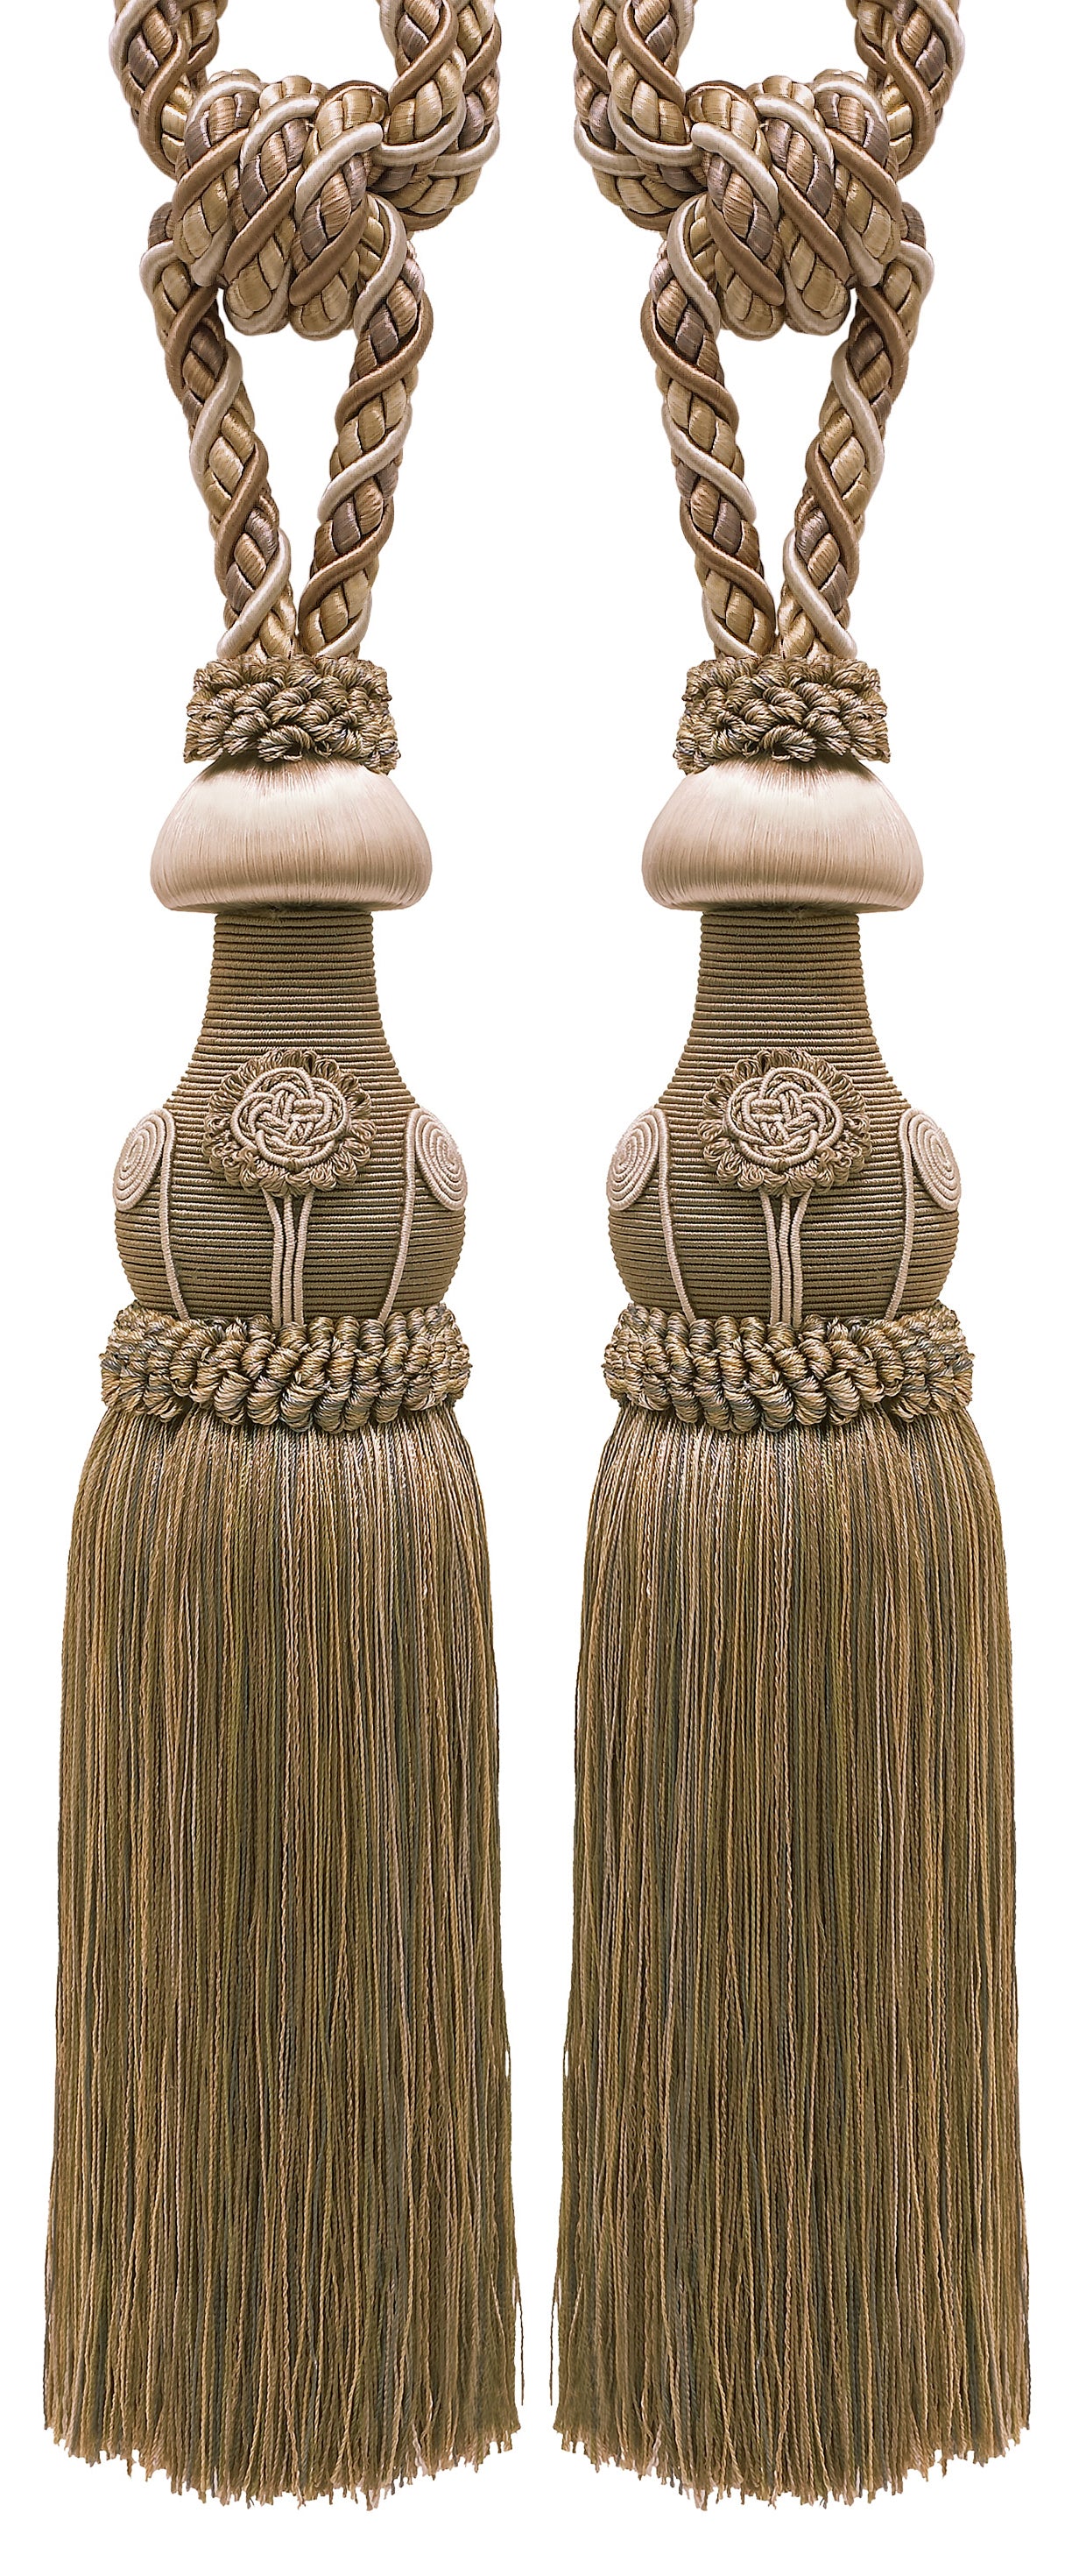 Gold, Navy Blue 3 3/4 inch Imperial II Tassel Fringe Style#Tfi2 Color: Navy Blue Gold - 1152 (Sold by The Yard)